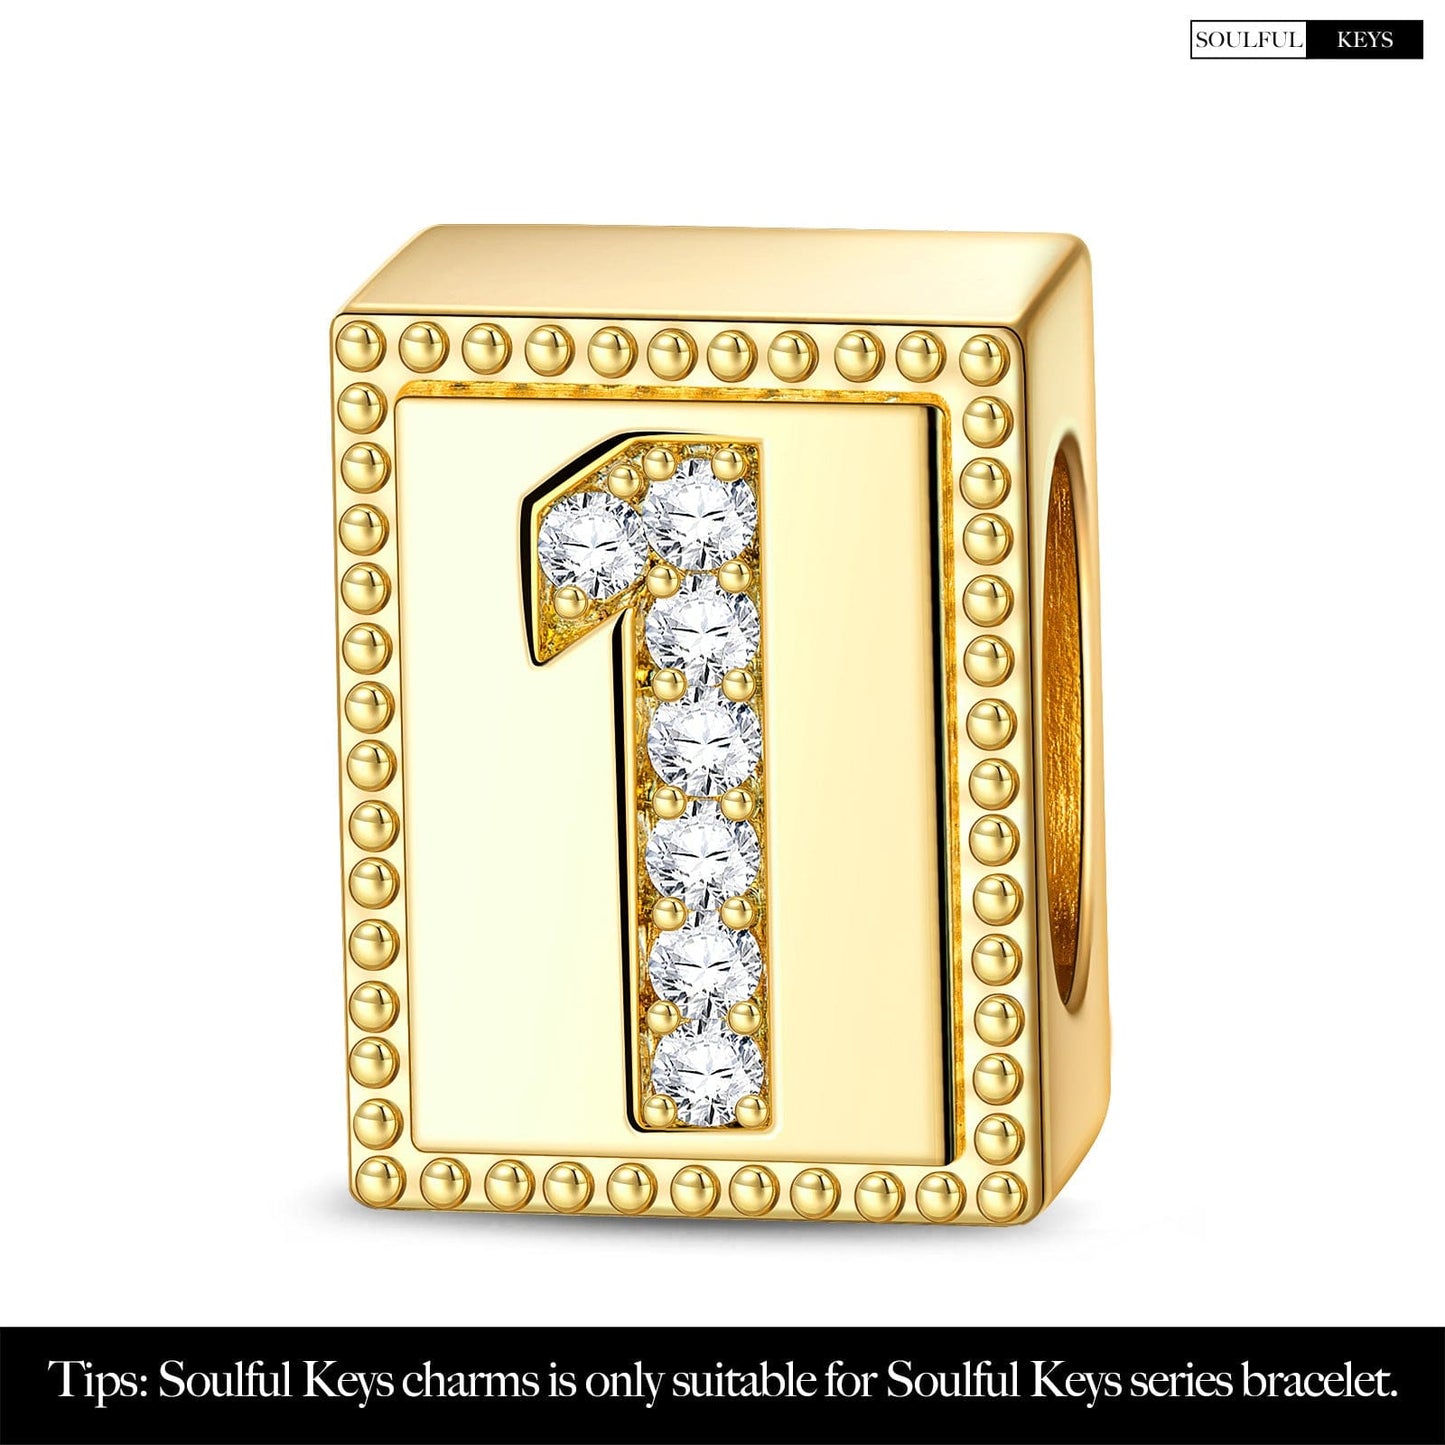 Number One Tarnish-resistant Silver Rectangular Charms In 14K Gold Plated